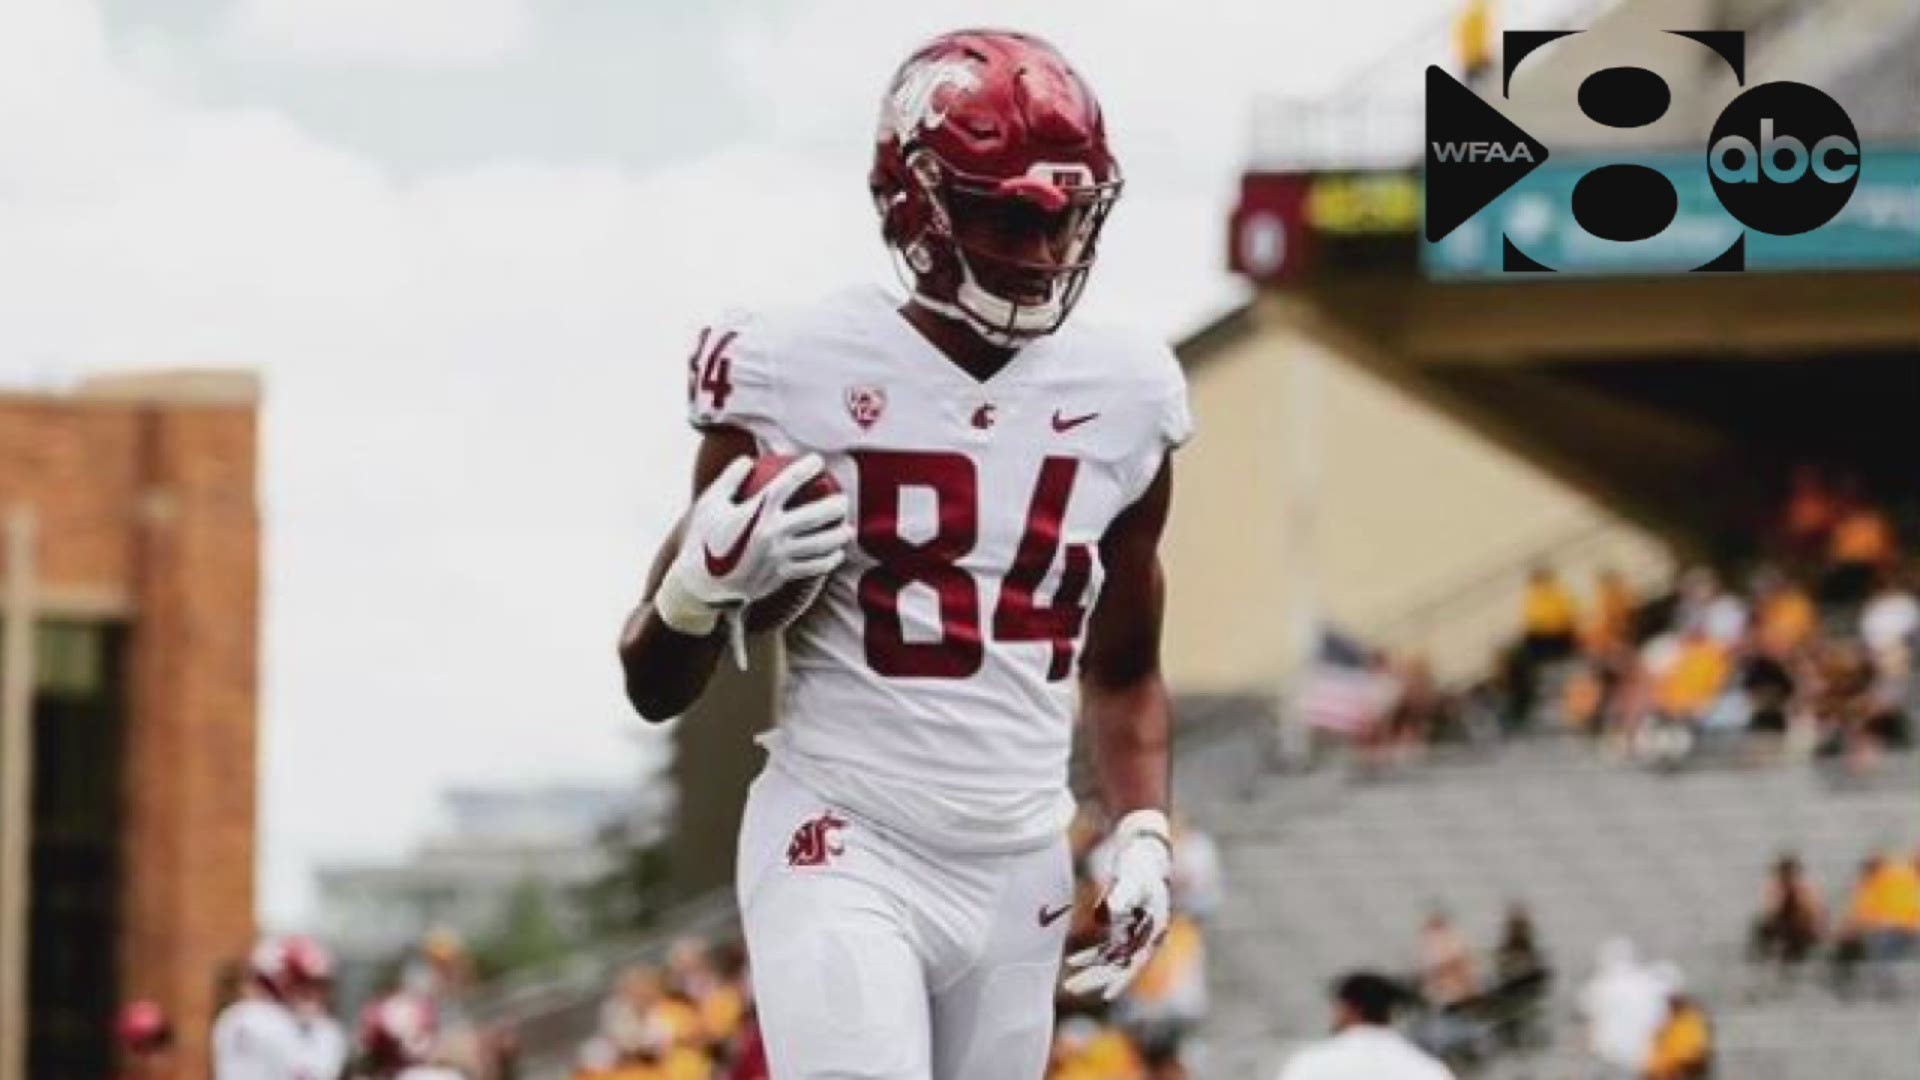 The Washington State sophomore receiver, an Addison native, remains on scholarship for this year, but his future with the program is uncertain.